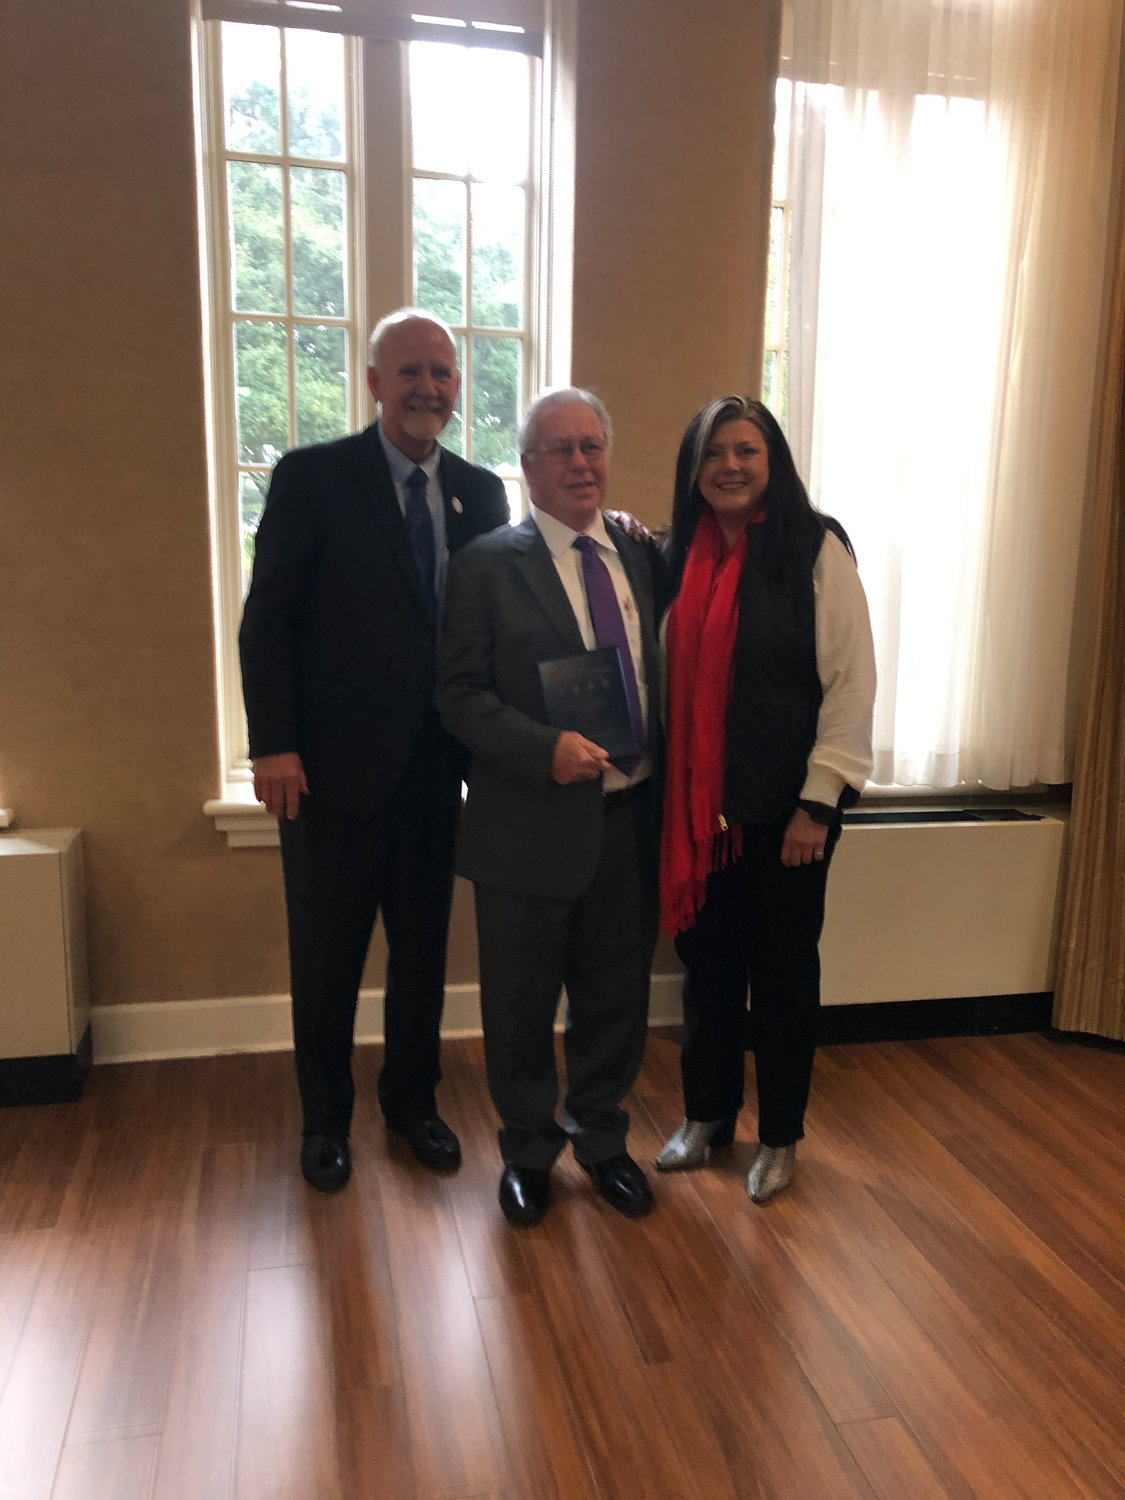 Pictured (l to r) are Mayor George Bass, 2022 Aline Doherty Citizen of the Year award recipient John Bull, and Long Beach Chamber of Commerce Chair Melissa Rae Seymour.